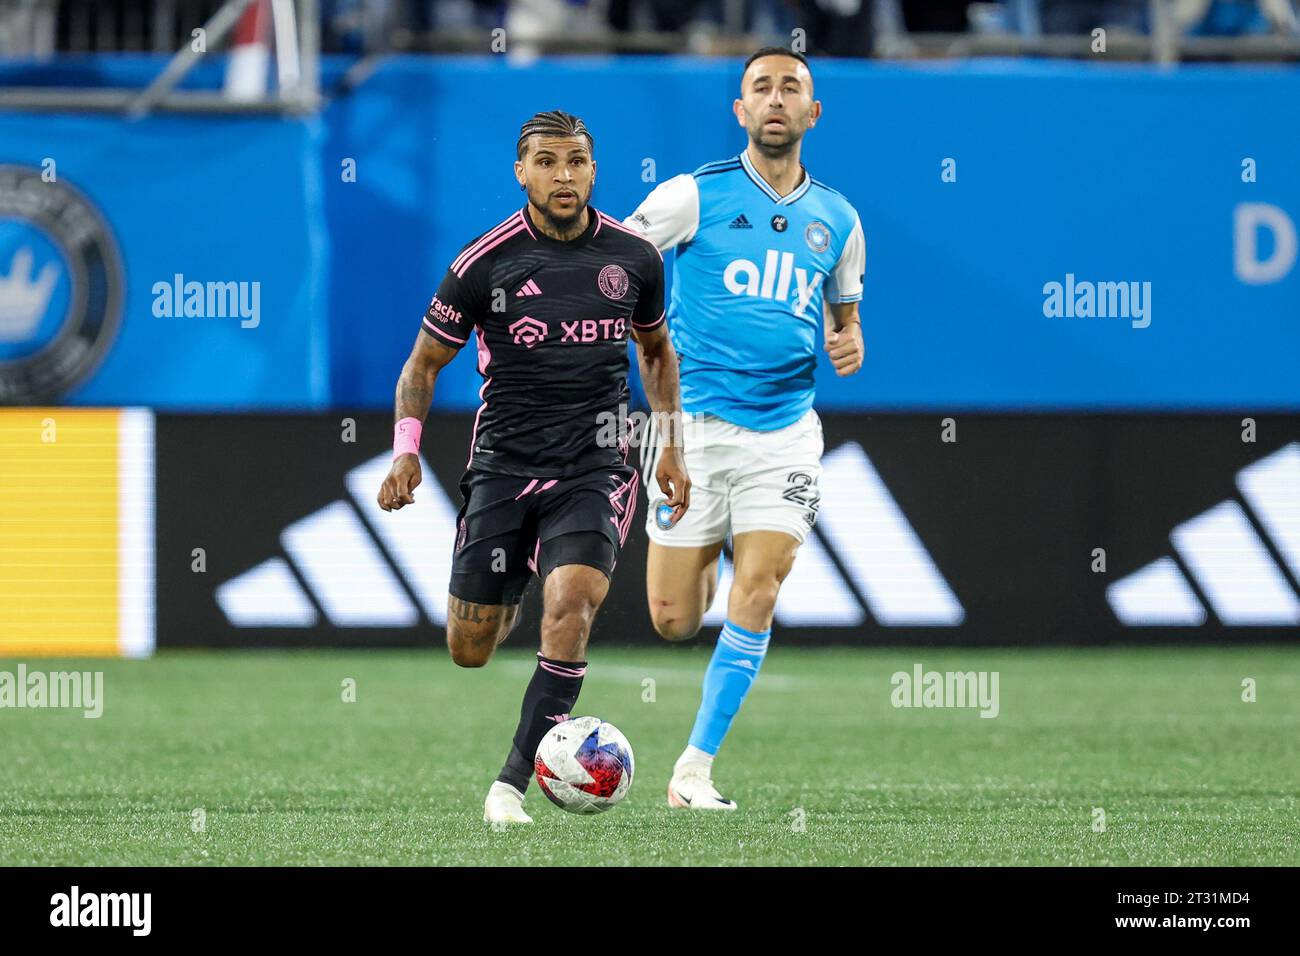 Charlotte, North Carolina, USA. 21st Oct, 2023. Inter Miami defender DeAndre Yedlin (2) controls the ball during the MLS soccer match between Inter Miami CF and Charlotte FC at Bank of America Stadium in Charlotte, North Carolina. Greg Atkins/CSM/Alamy Live News Stock Photo